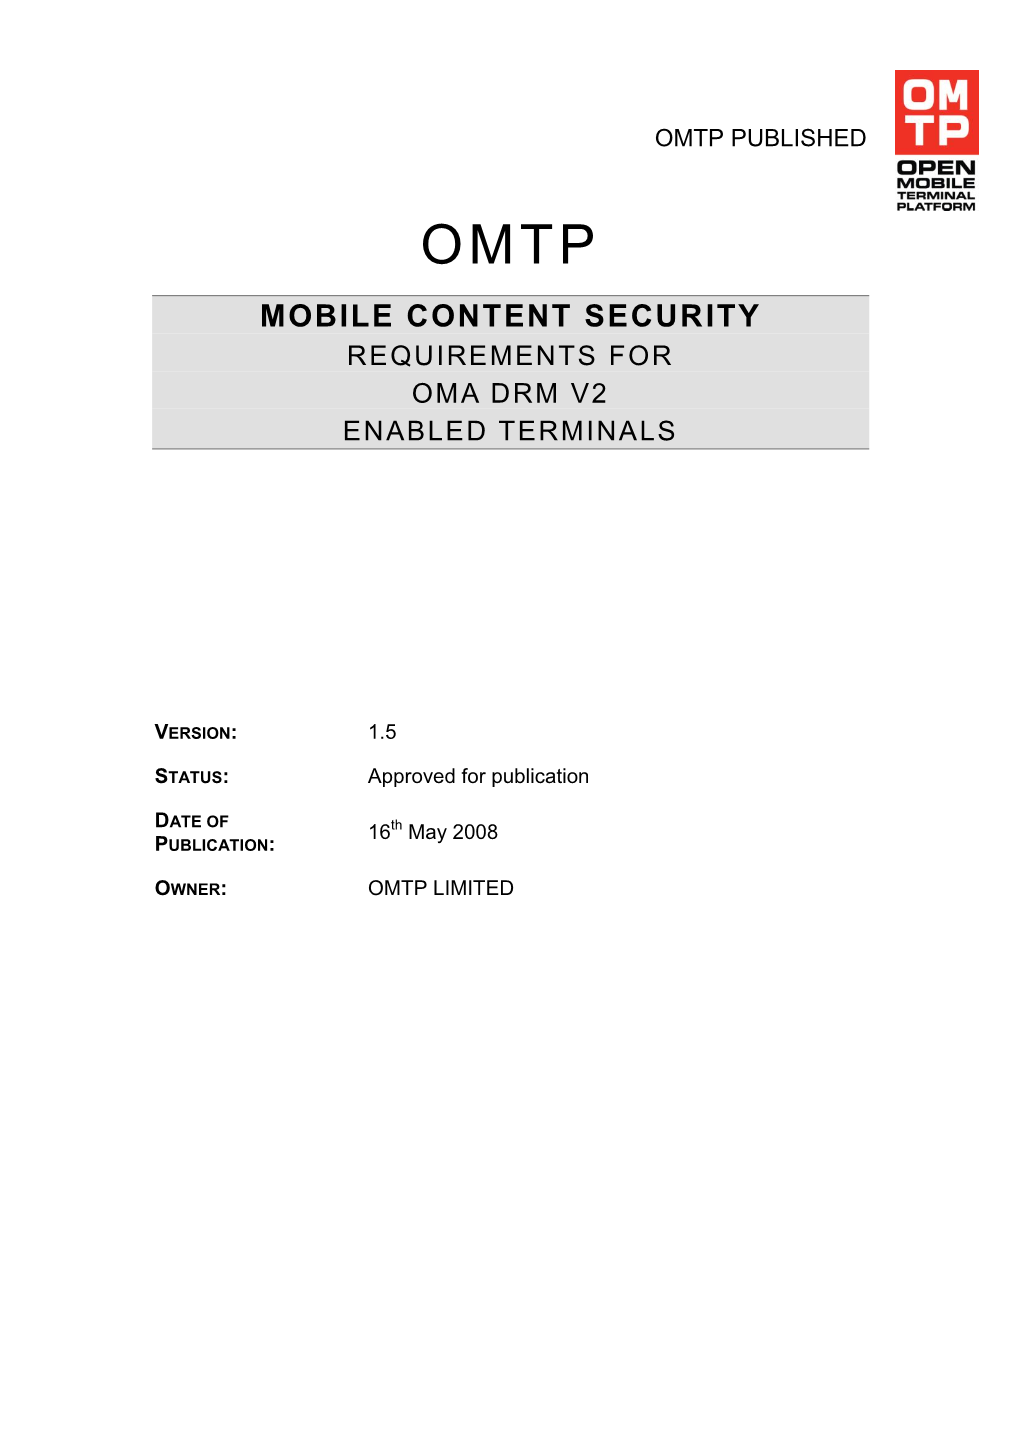 Mobile Content Security Requirements for Oma Drm V2 Enabled Terminals